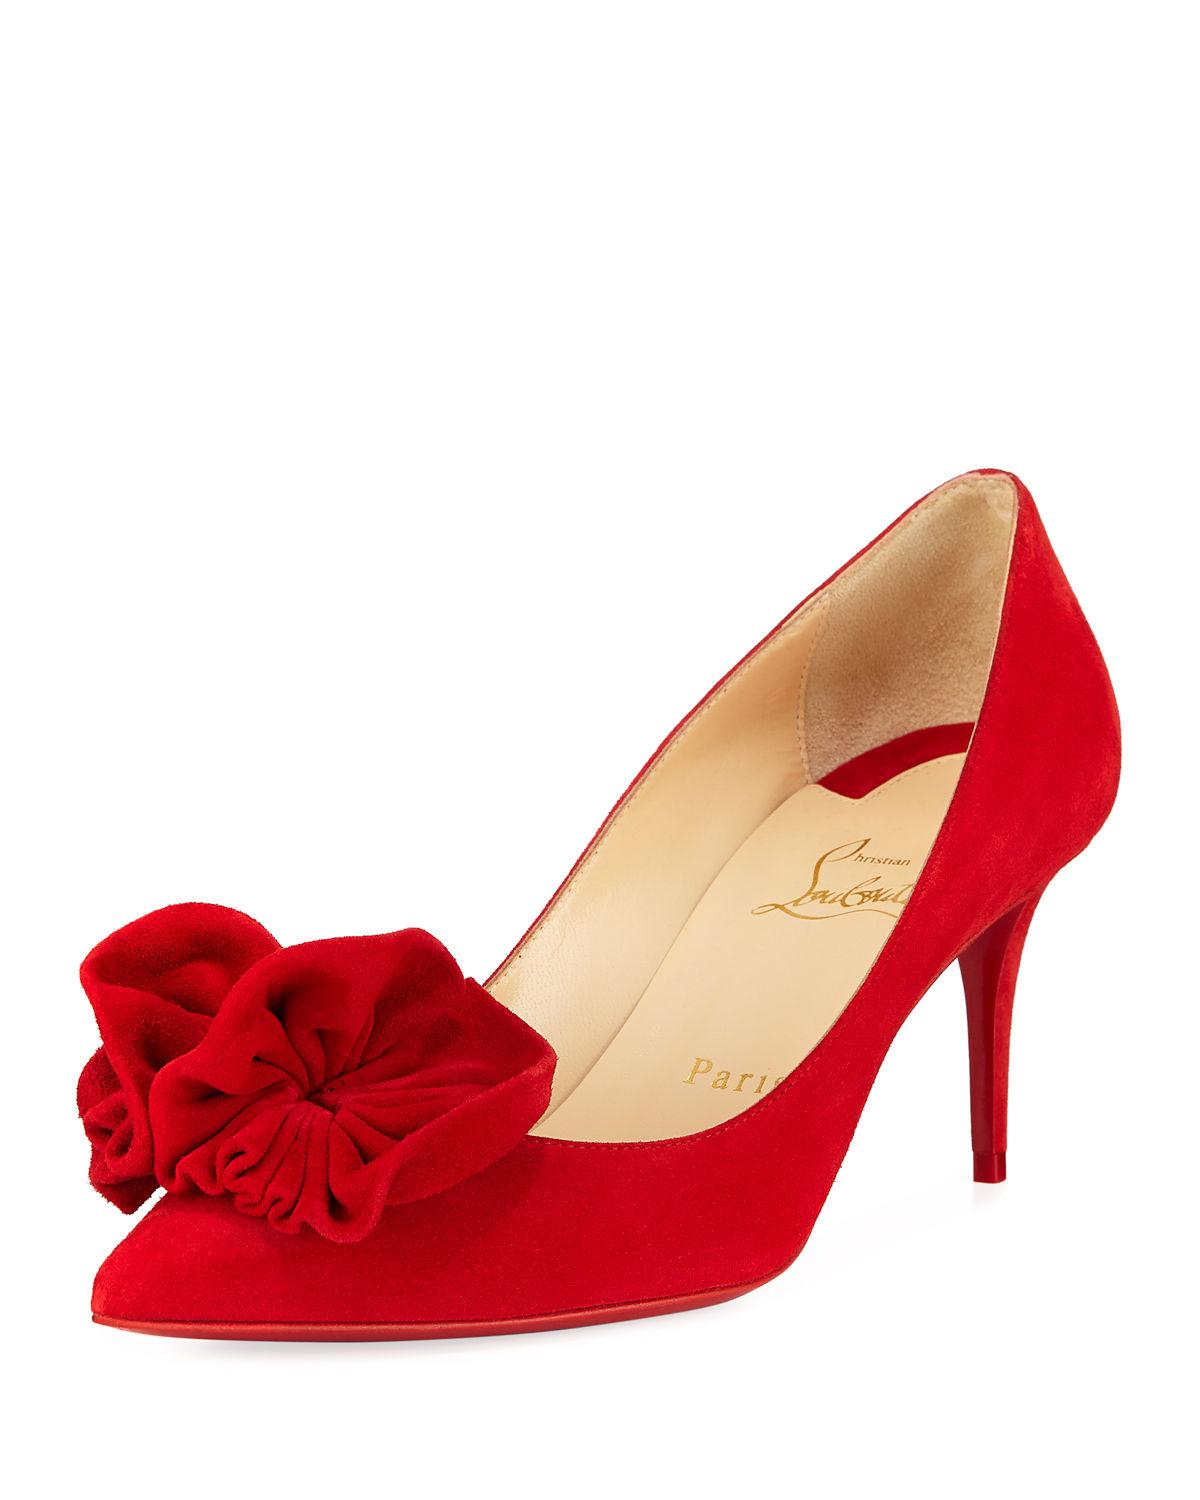 Christian Louboutin Anemosia Suede Bow Red Sole Pumps - Lyst